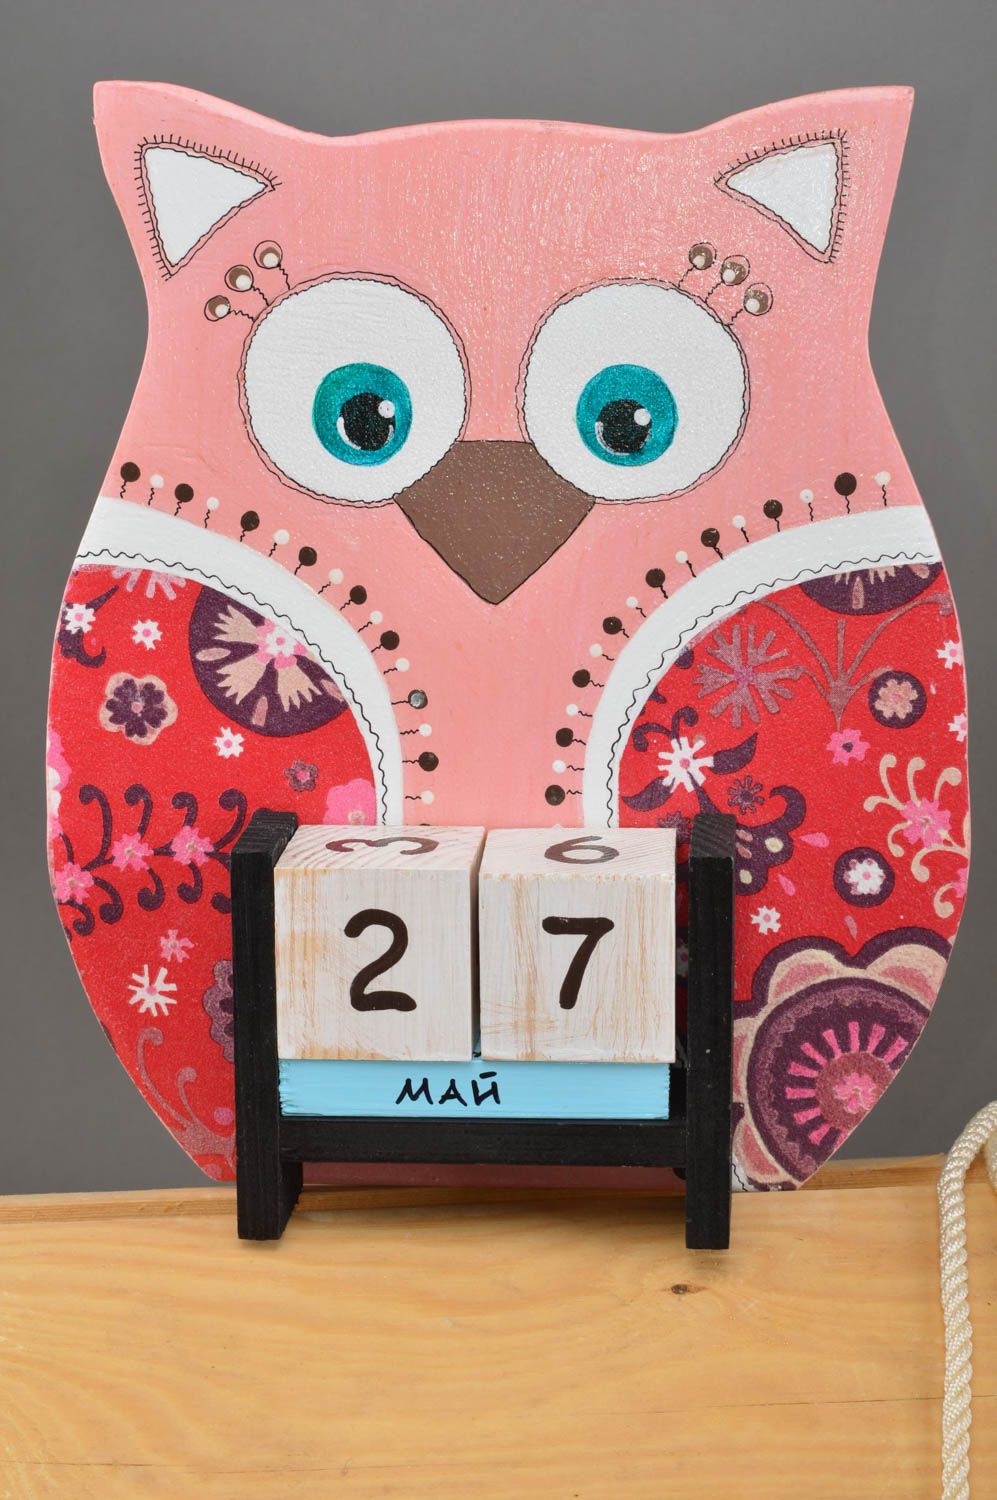 Bright pink calendar unusual table decor beautiful stylish toys for kids photo 2